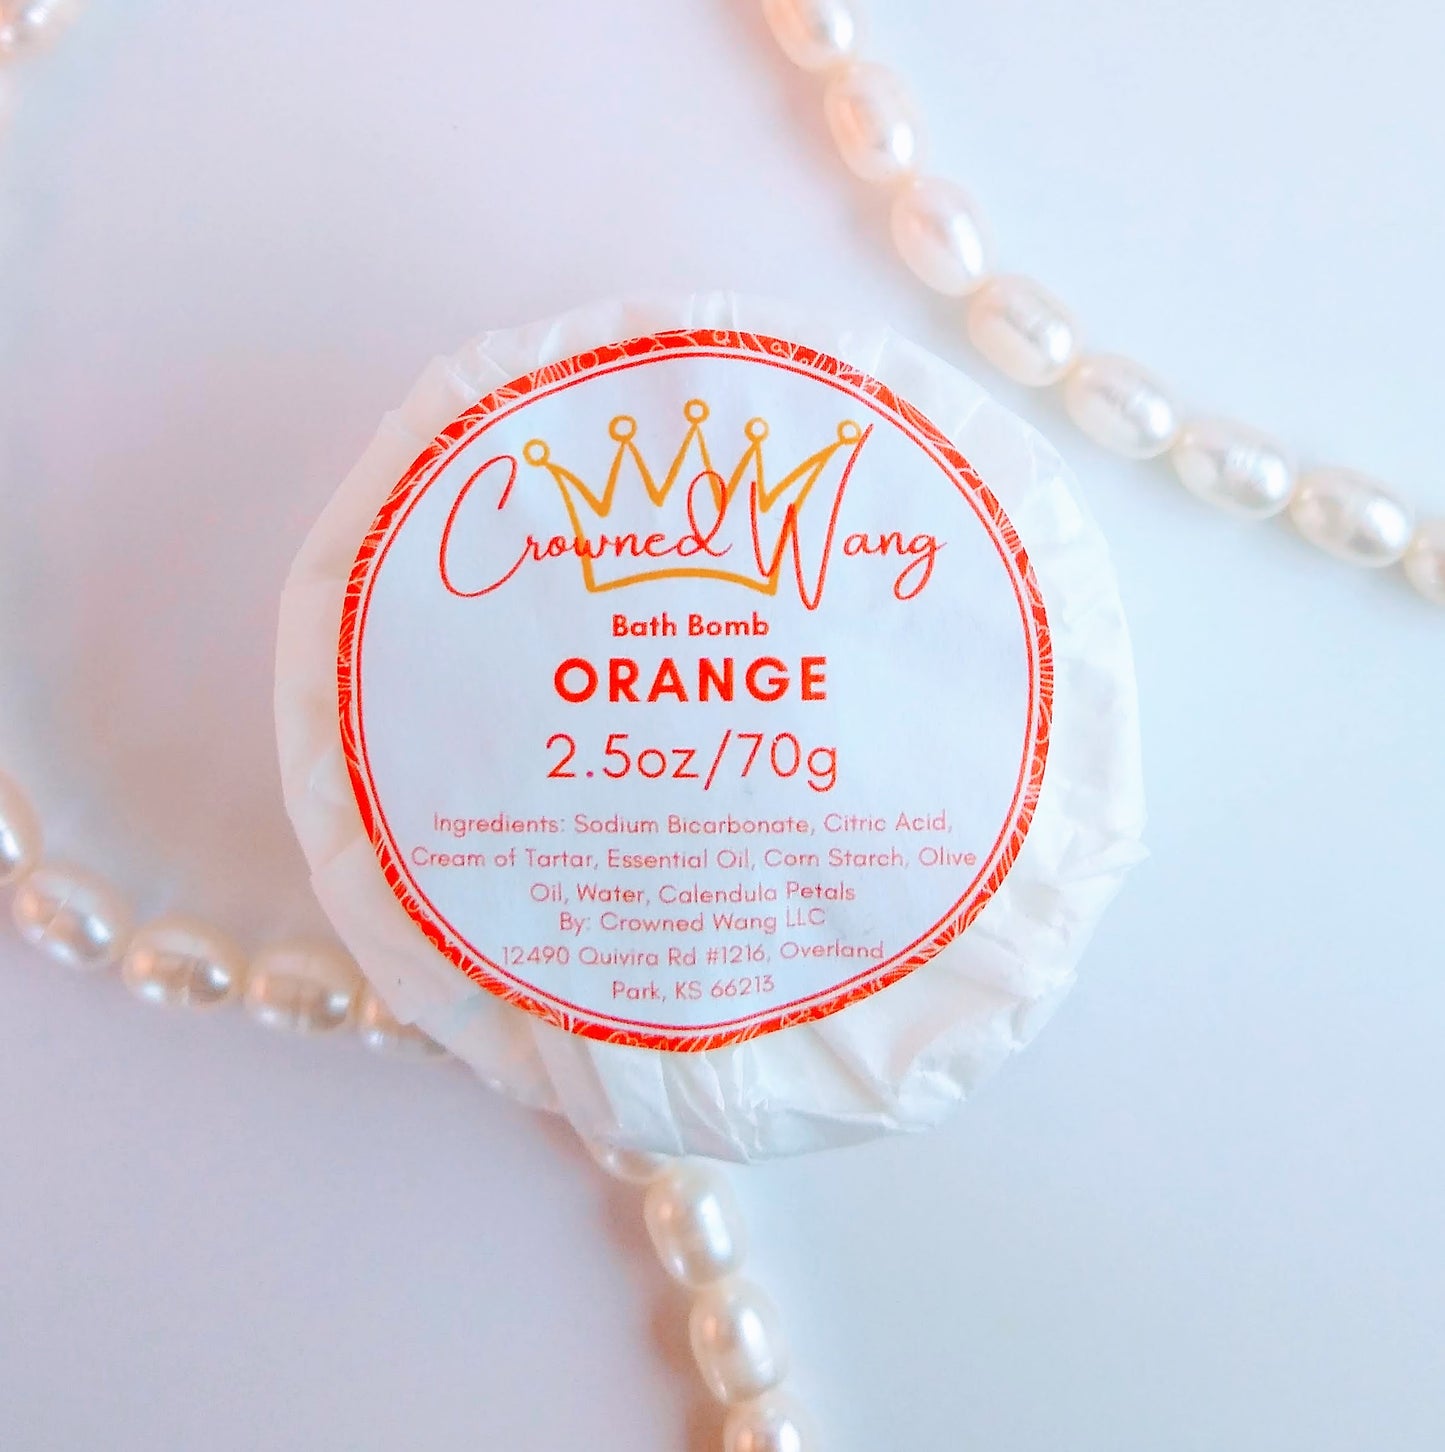 Crowned Wang brand 2.5oz orange bath bomb with orange and white label framed by pearls. The label also includes a yellow crown outline.